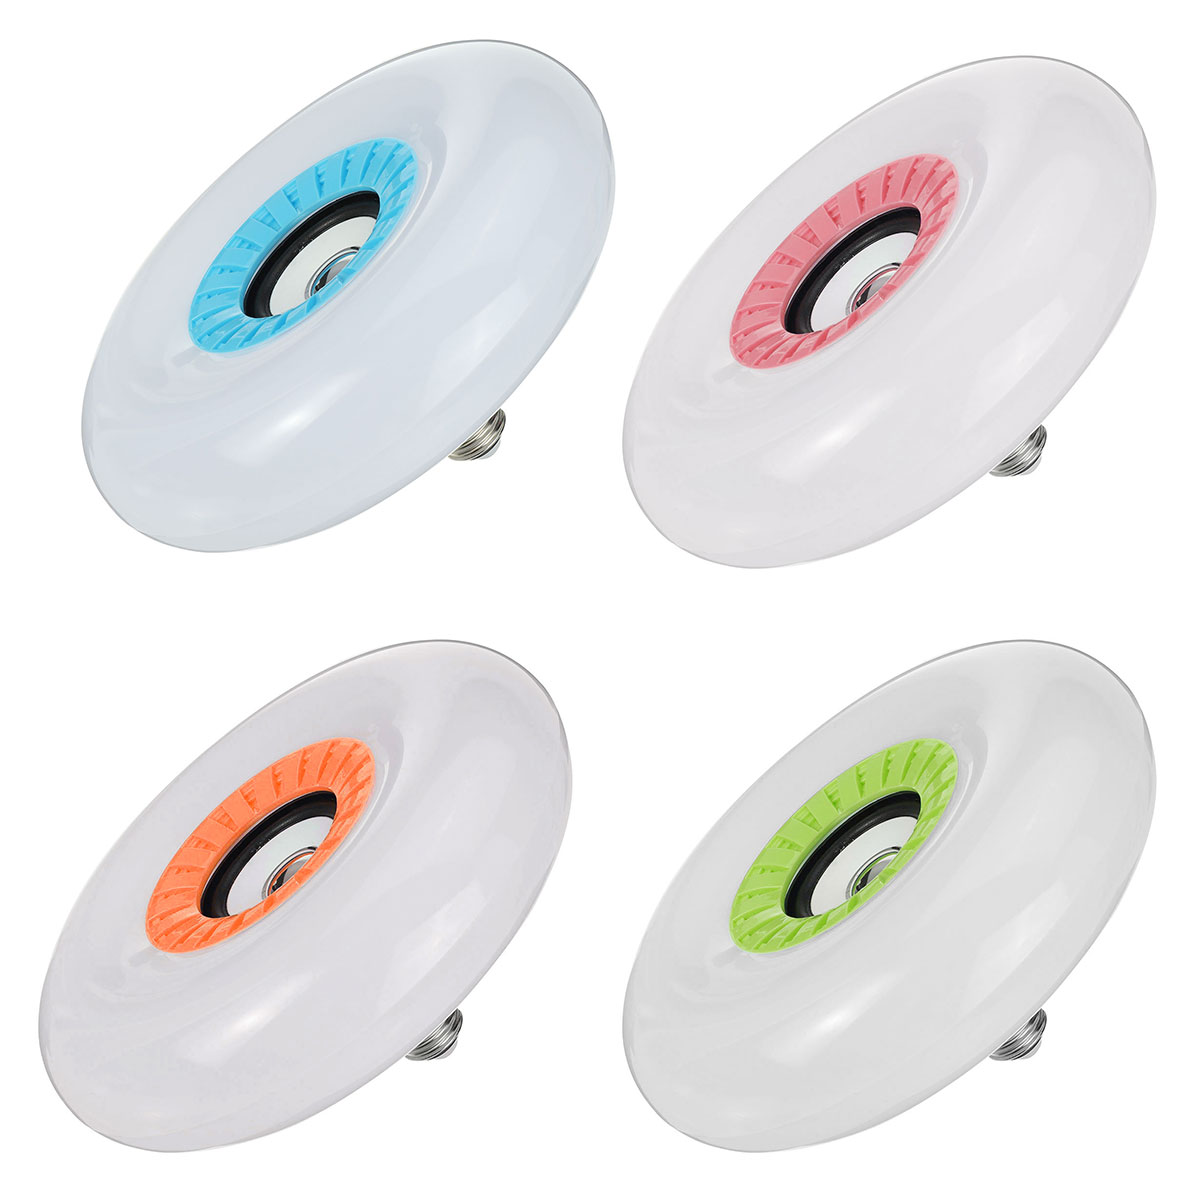 85-265V-E27-Smart-bluetooth--LED-Ceiling-Light-RGB-Music-Speeker-Dimmable-Lamp--Remote-1837972-8